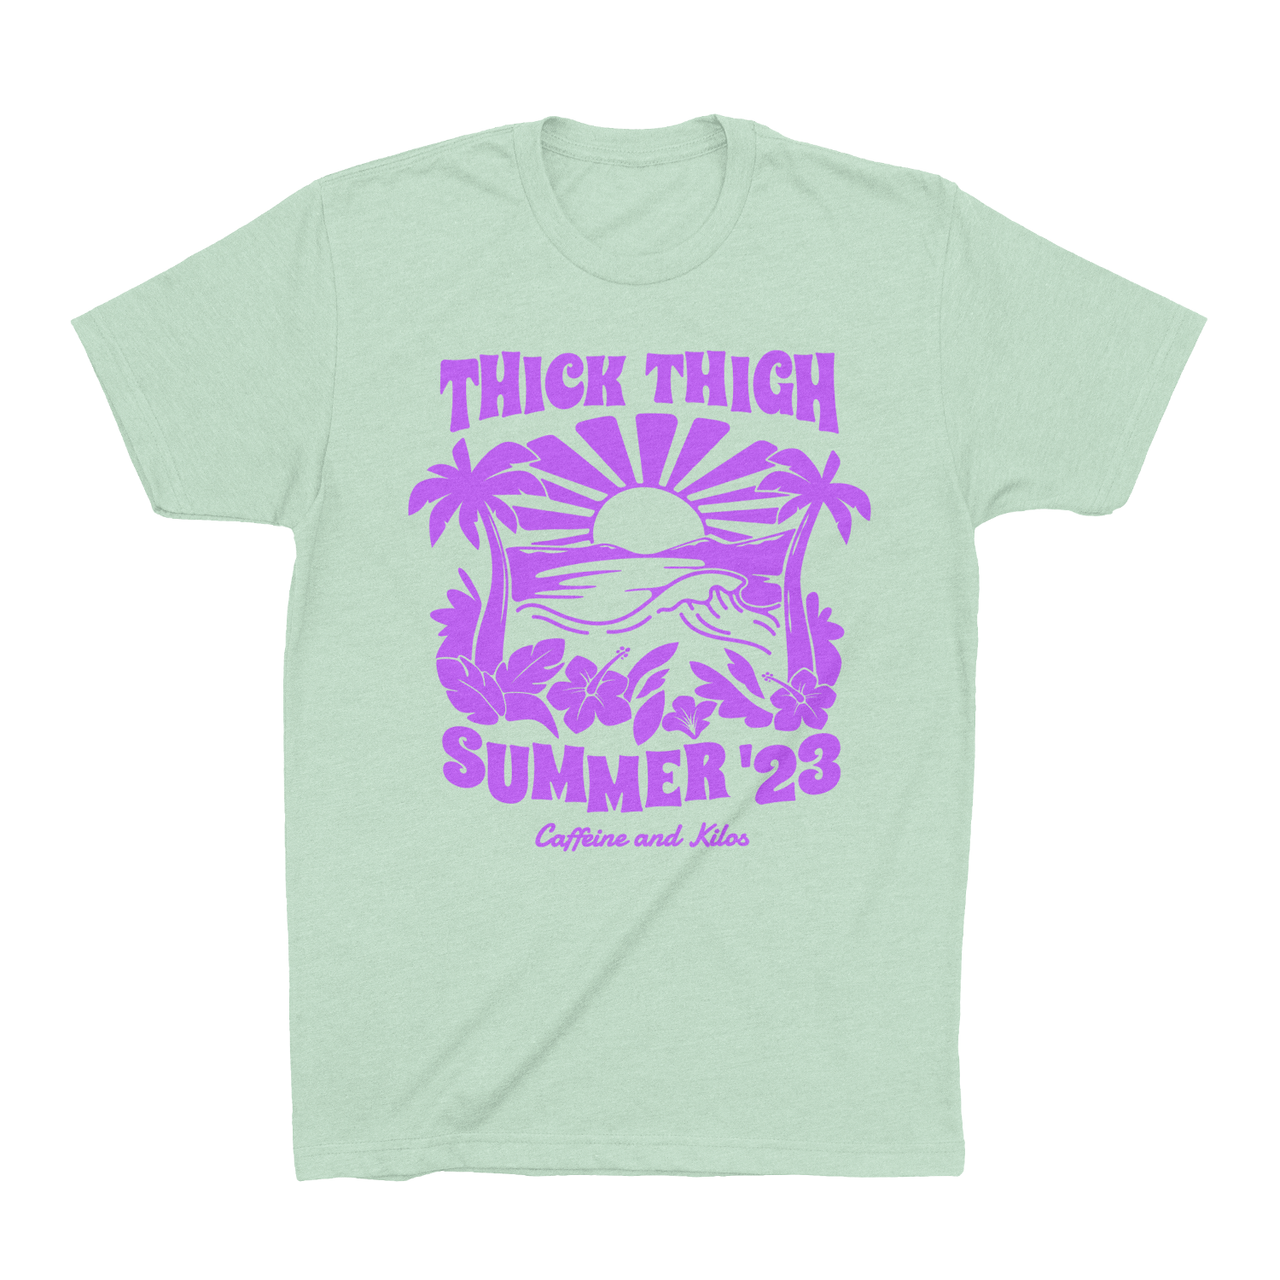 Thick Thigh Summer Tee - Outlet